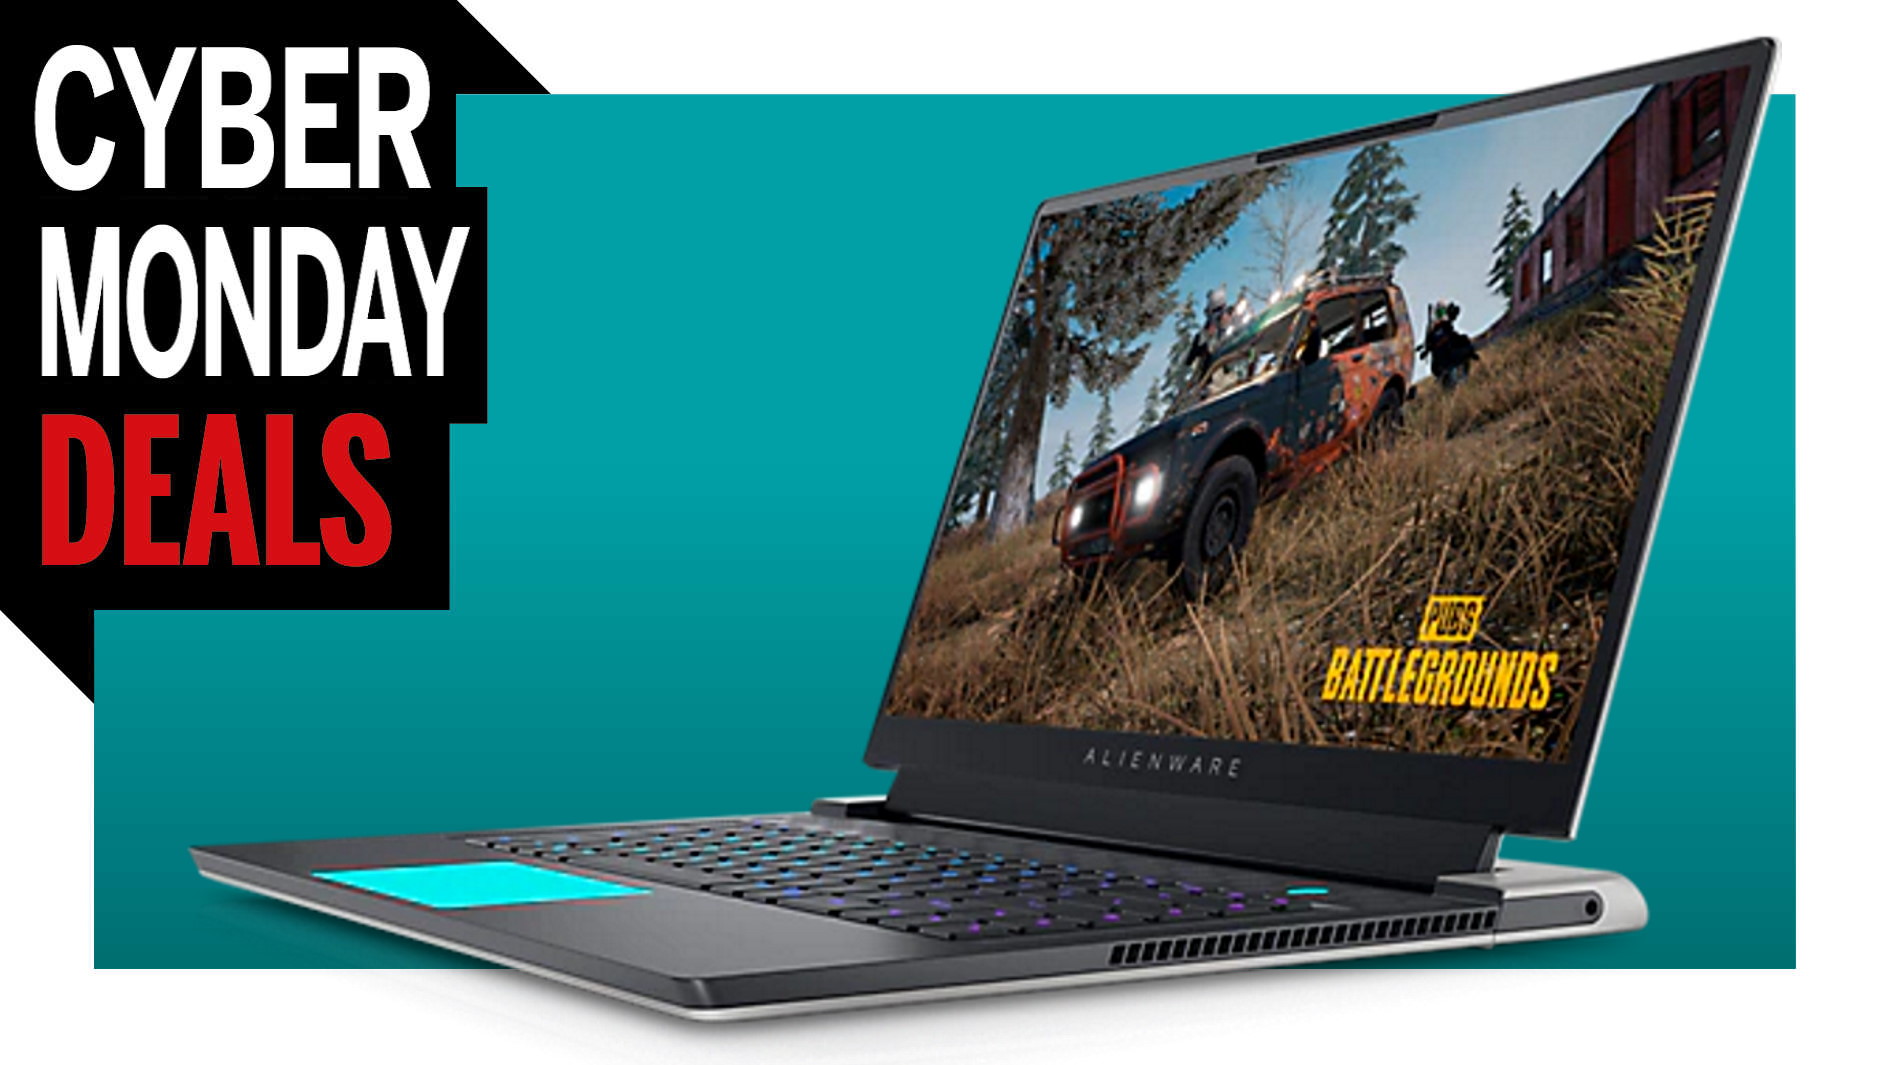 This Alienware X15 Gaming Laptop With An RTX 3070 GPU Is $718 Off For Cyber Monday thumbnail